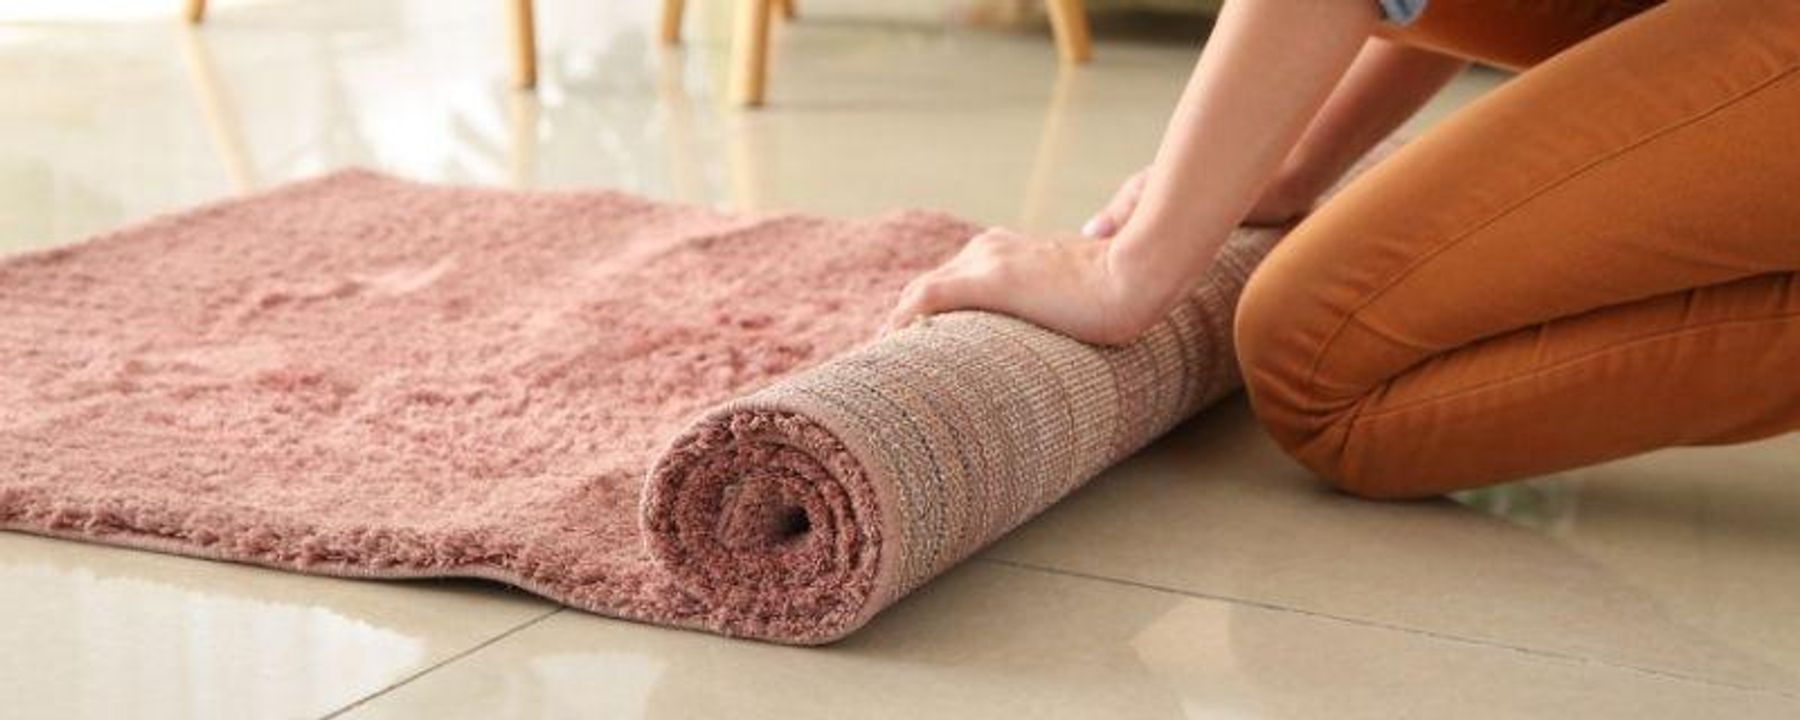 Carpet Padding Buyer's Guide: How to Choose the Best Padding for